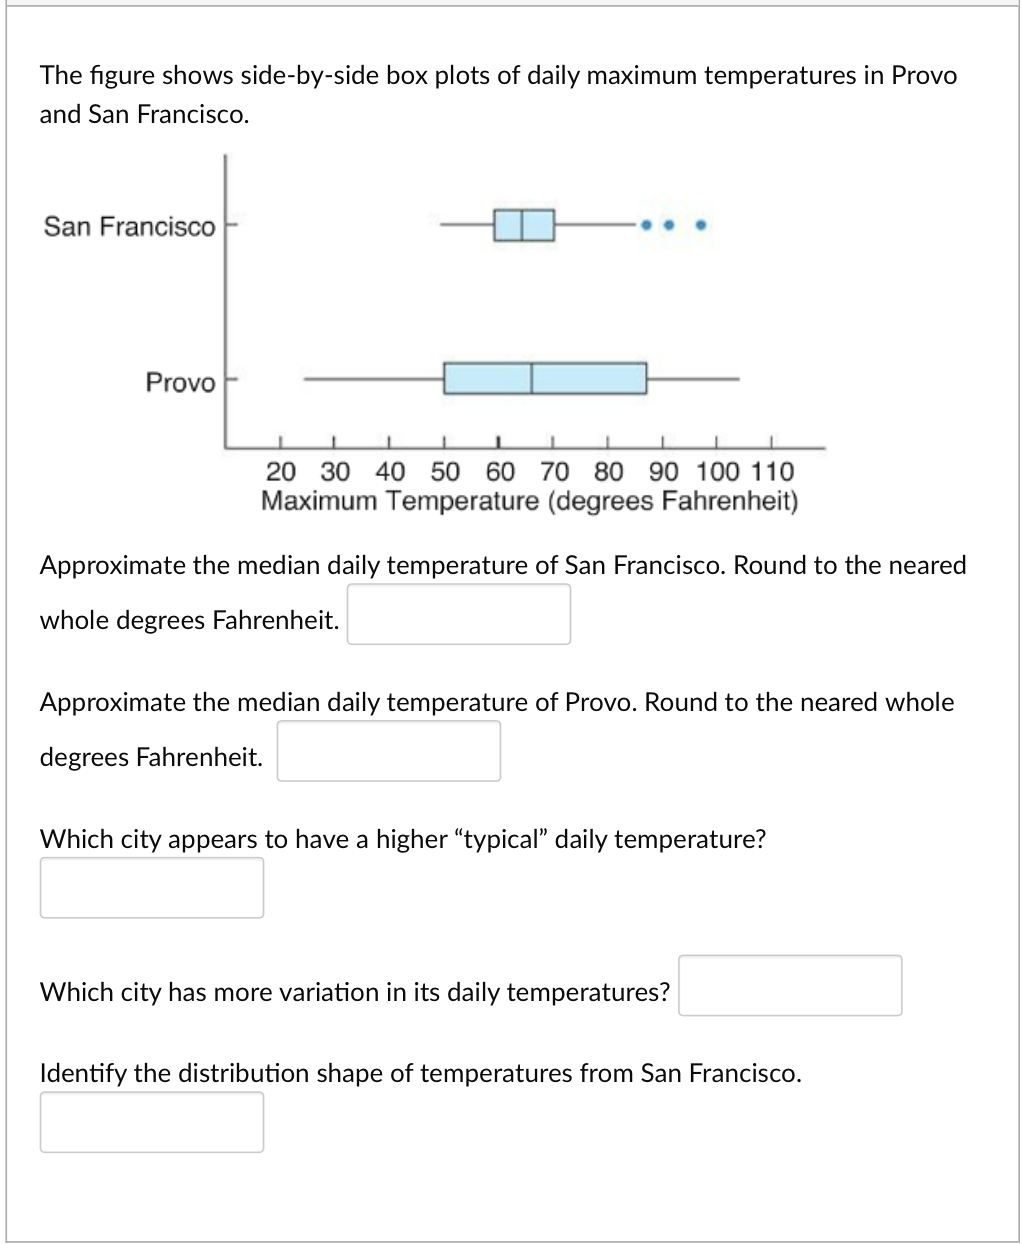 The figure shows side-by-side box plots of daily maximum temperatures in Provo
and San Francisco.
San Francisco
Provo
1
20 30 40 50 60 70 80 90 100 110
Maximum Temperature (degrees Fahrenheit)
Approximate the median daily temperature of San Francisco. Round to the neared
whole degrees Fahrenheit.
Approximate the median daily temperature of Provo. Round to the neared whole
degrees Fahrenheit.
Which city appears to have a higher "typical" daily temperature?
Which city has more variation in its daily temperatures?
Identify the distribution shape of temperatures from San Francisco.